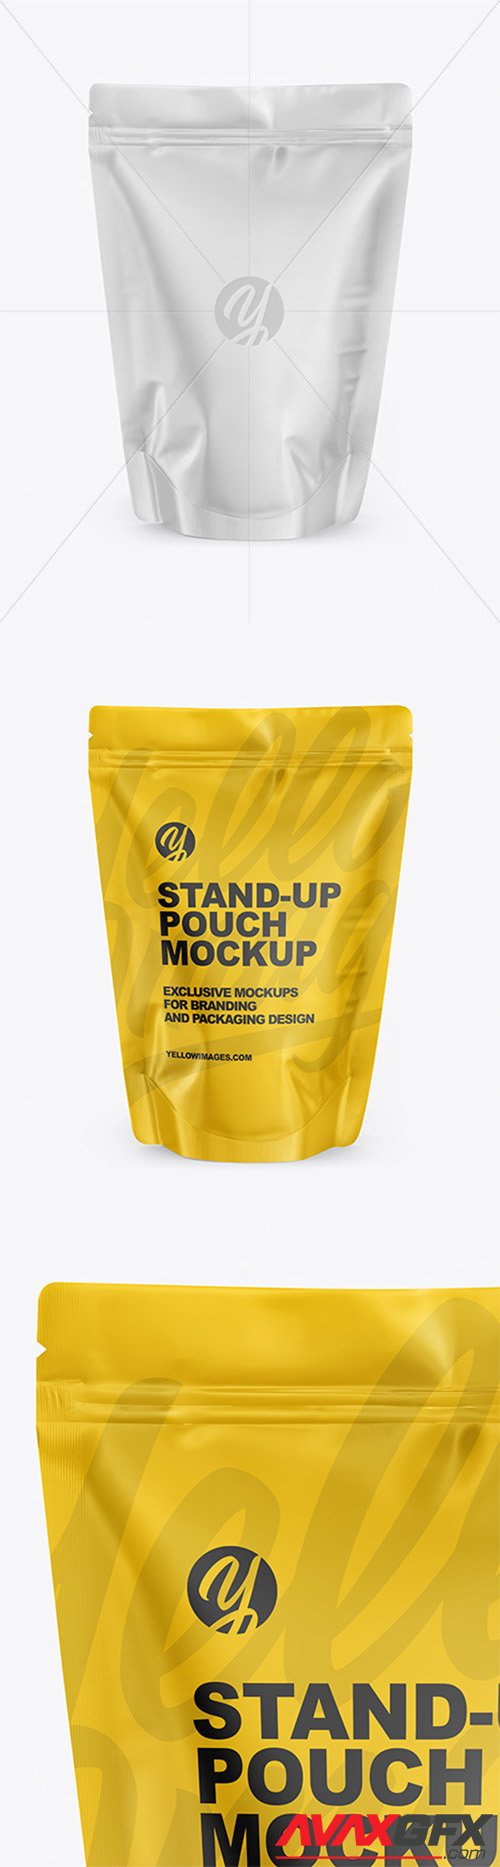 Download Stand Up Pouch Mockup Set Avaxgfx All Downloads That You Need In One Place Graphic From Nitroflare Rapidgator PSD Mockup Templates